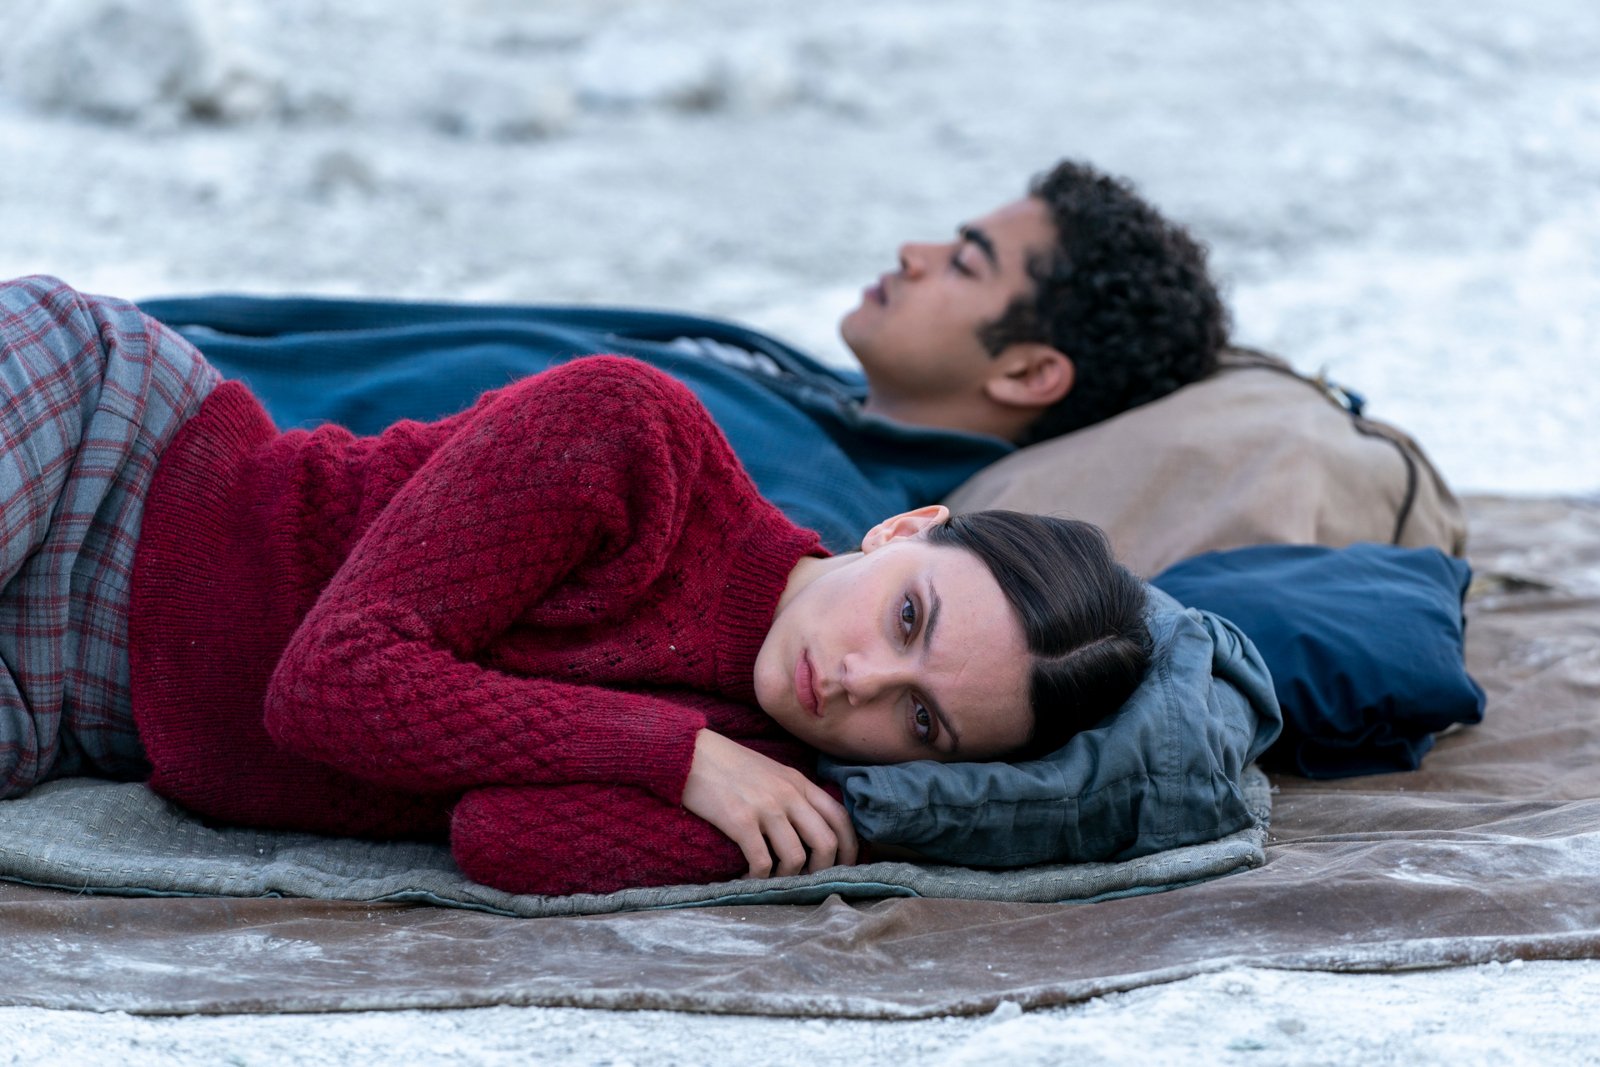 Dafne Keen and Amir Wilson as Lyra and Will in 'His Dark Materials' Season 3, which will serve as the show's ending. They're laying next to one another on an icy floor.